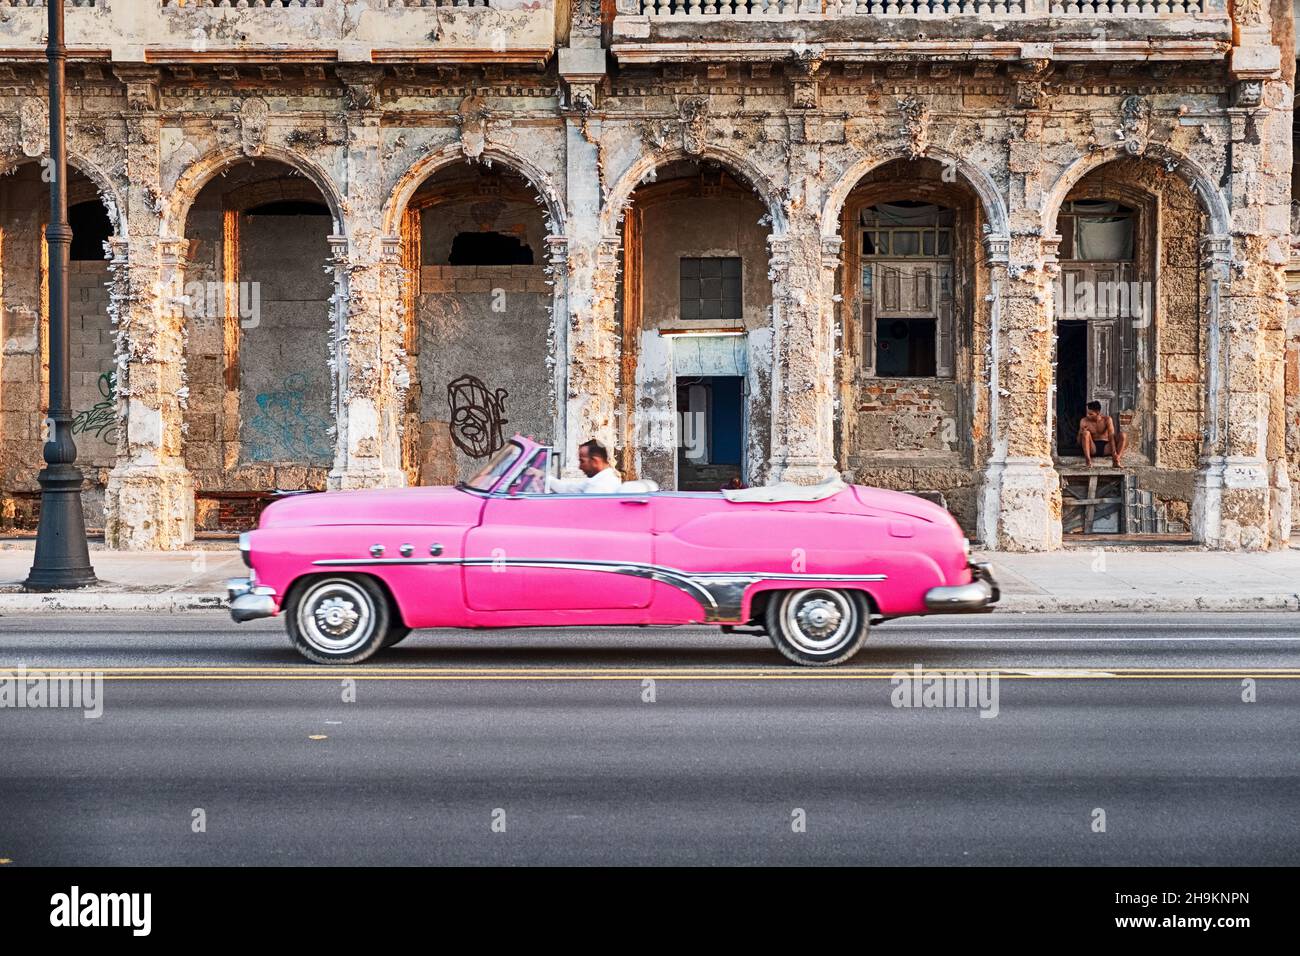 HAVANA, CUBA - DECEMBER 31, 2019: An anonymous man drives a vintage pink American convertible as a taxi on the Malecon waterfront road in front of an Stock Photo